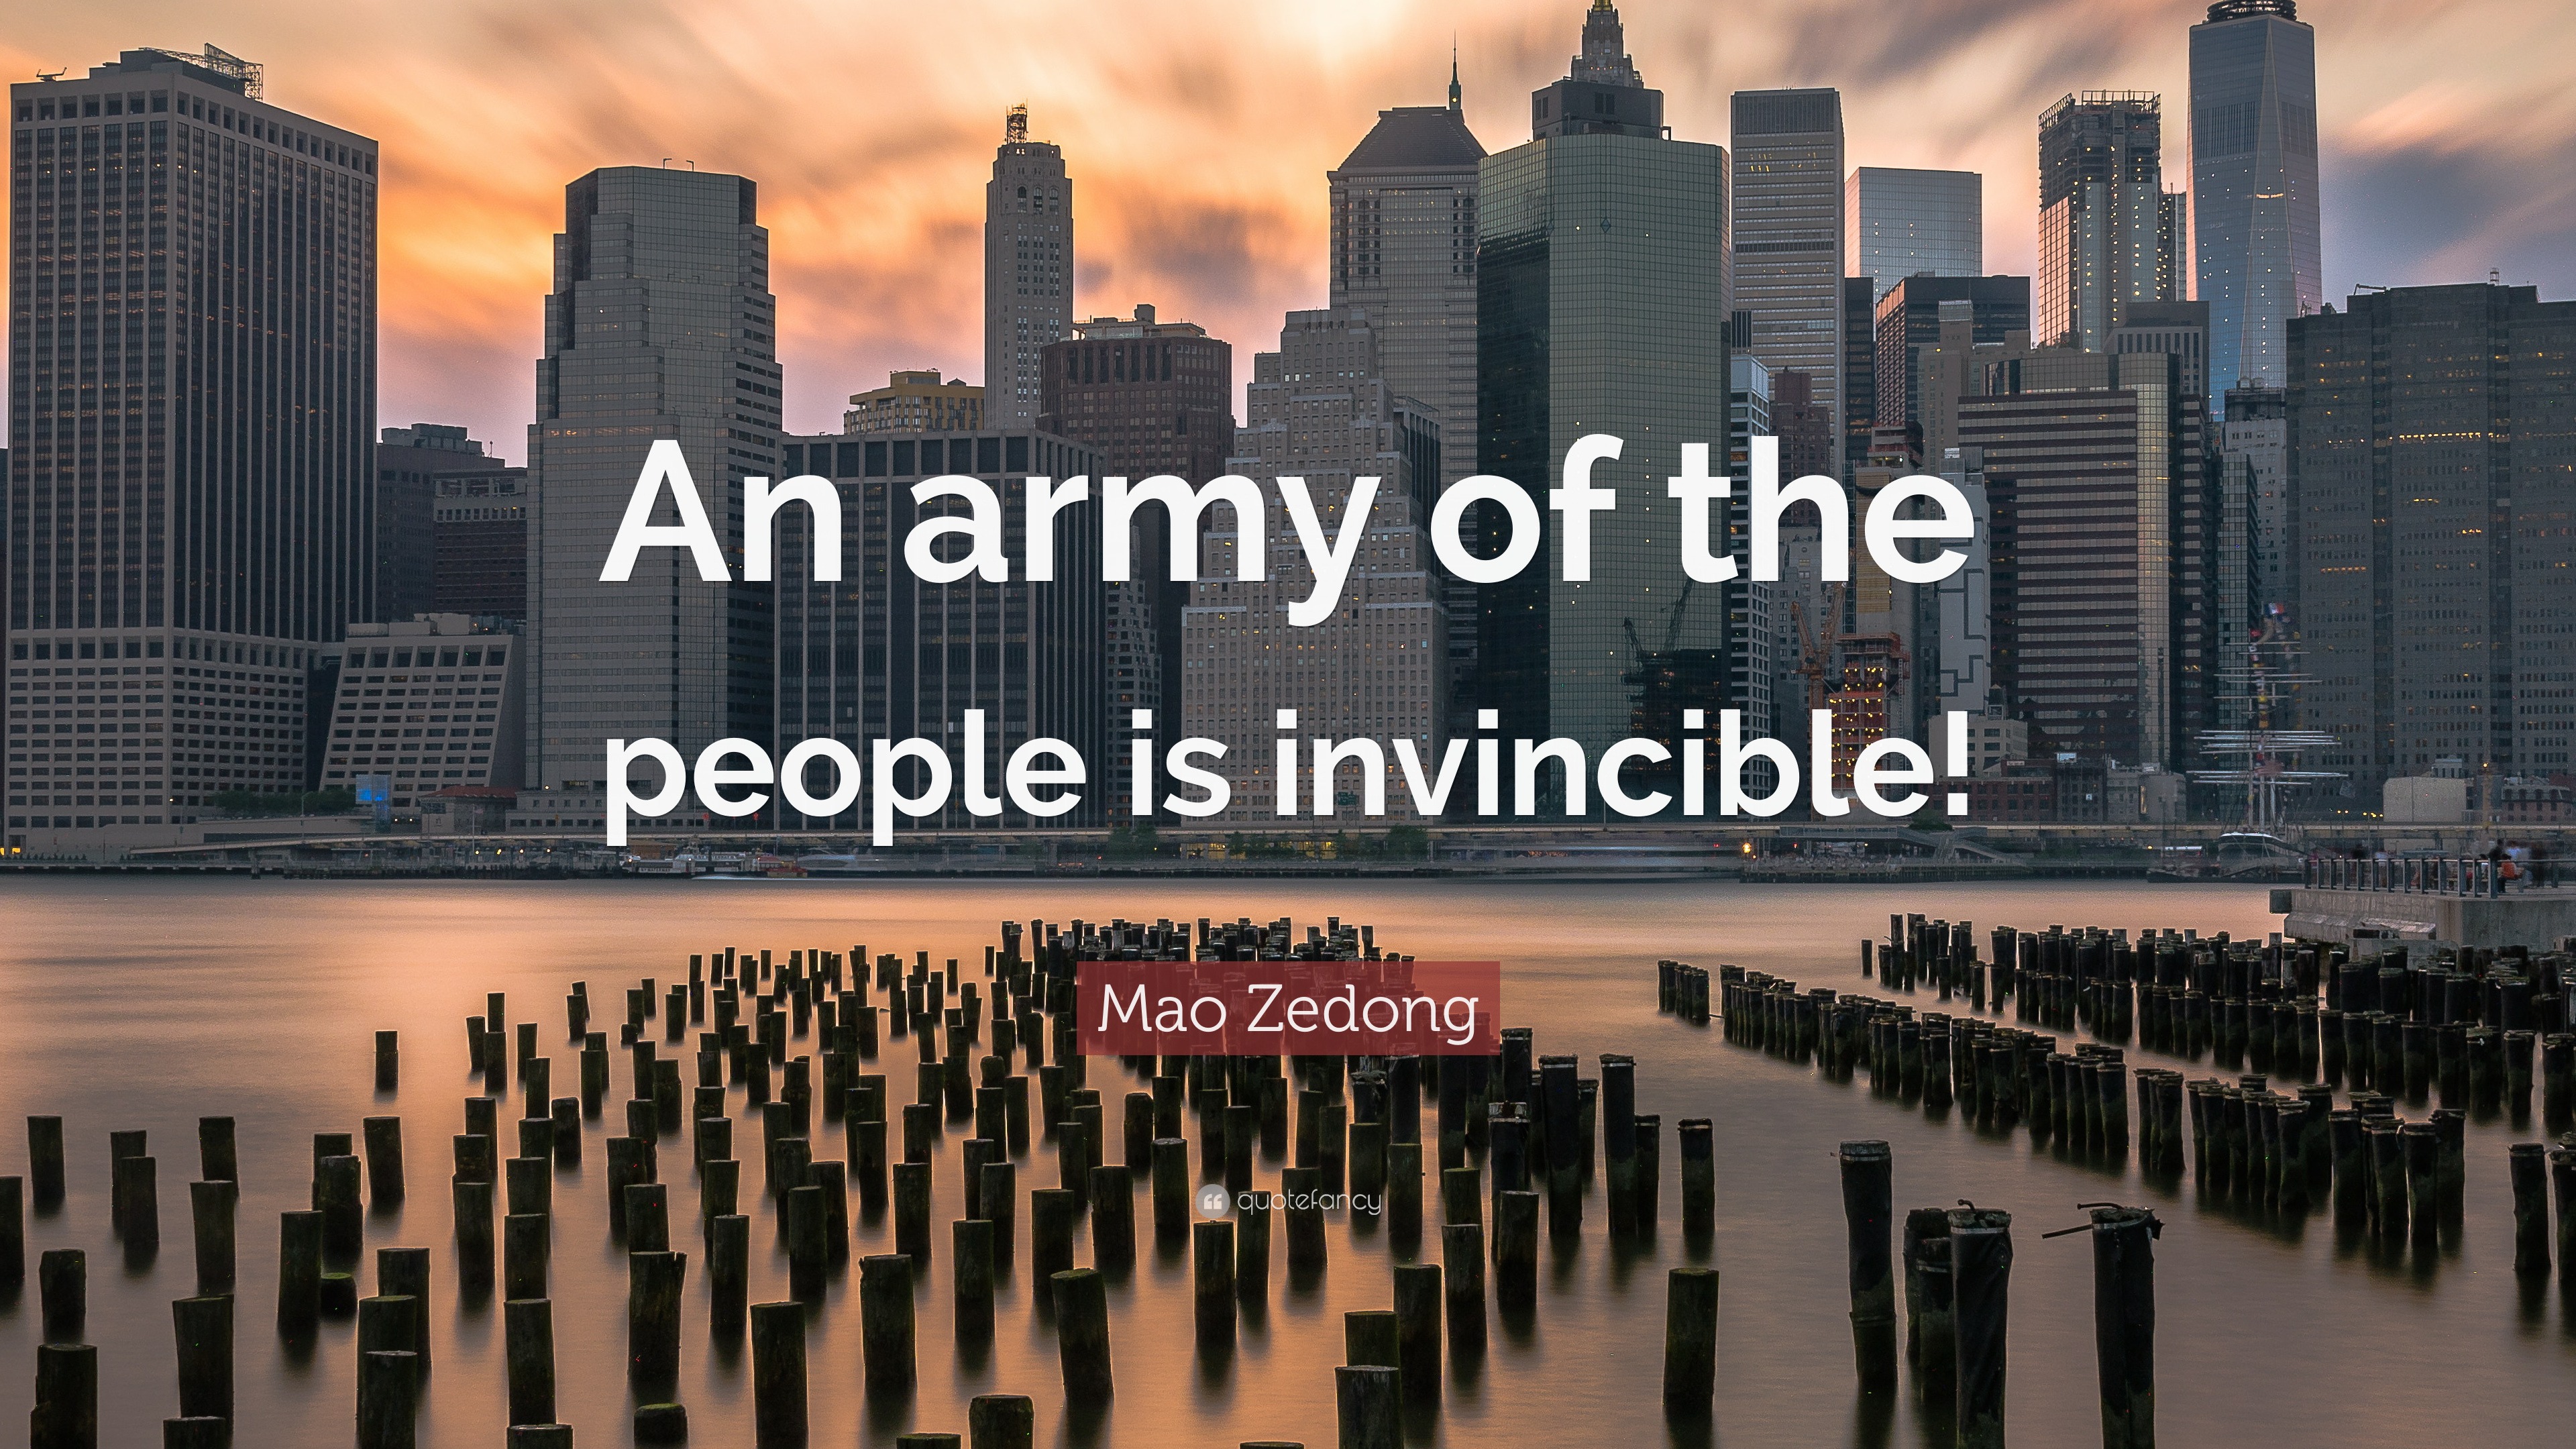 Mao Zedong Quote: “An army of the people is invincible!”